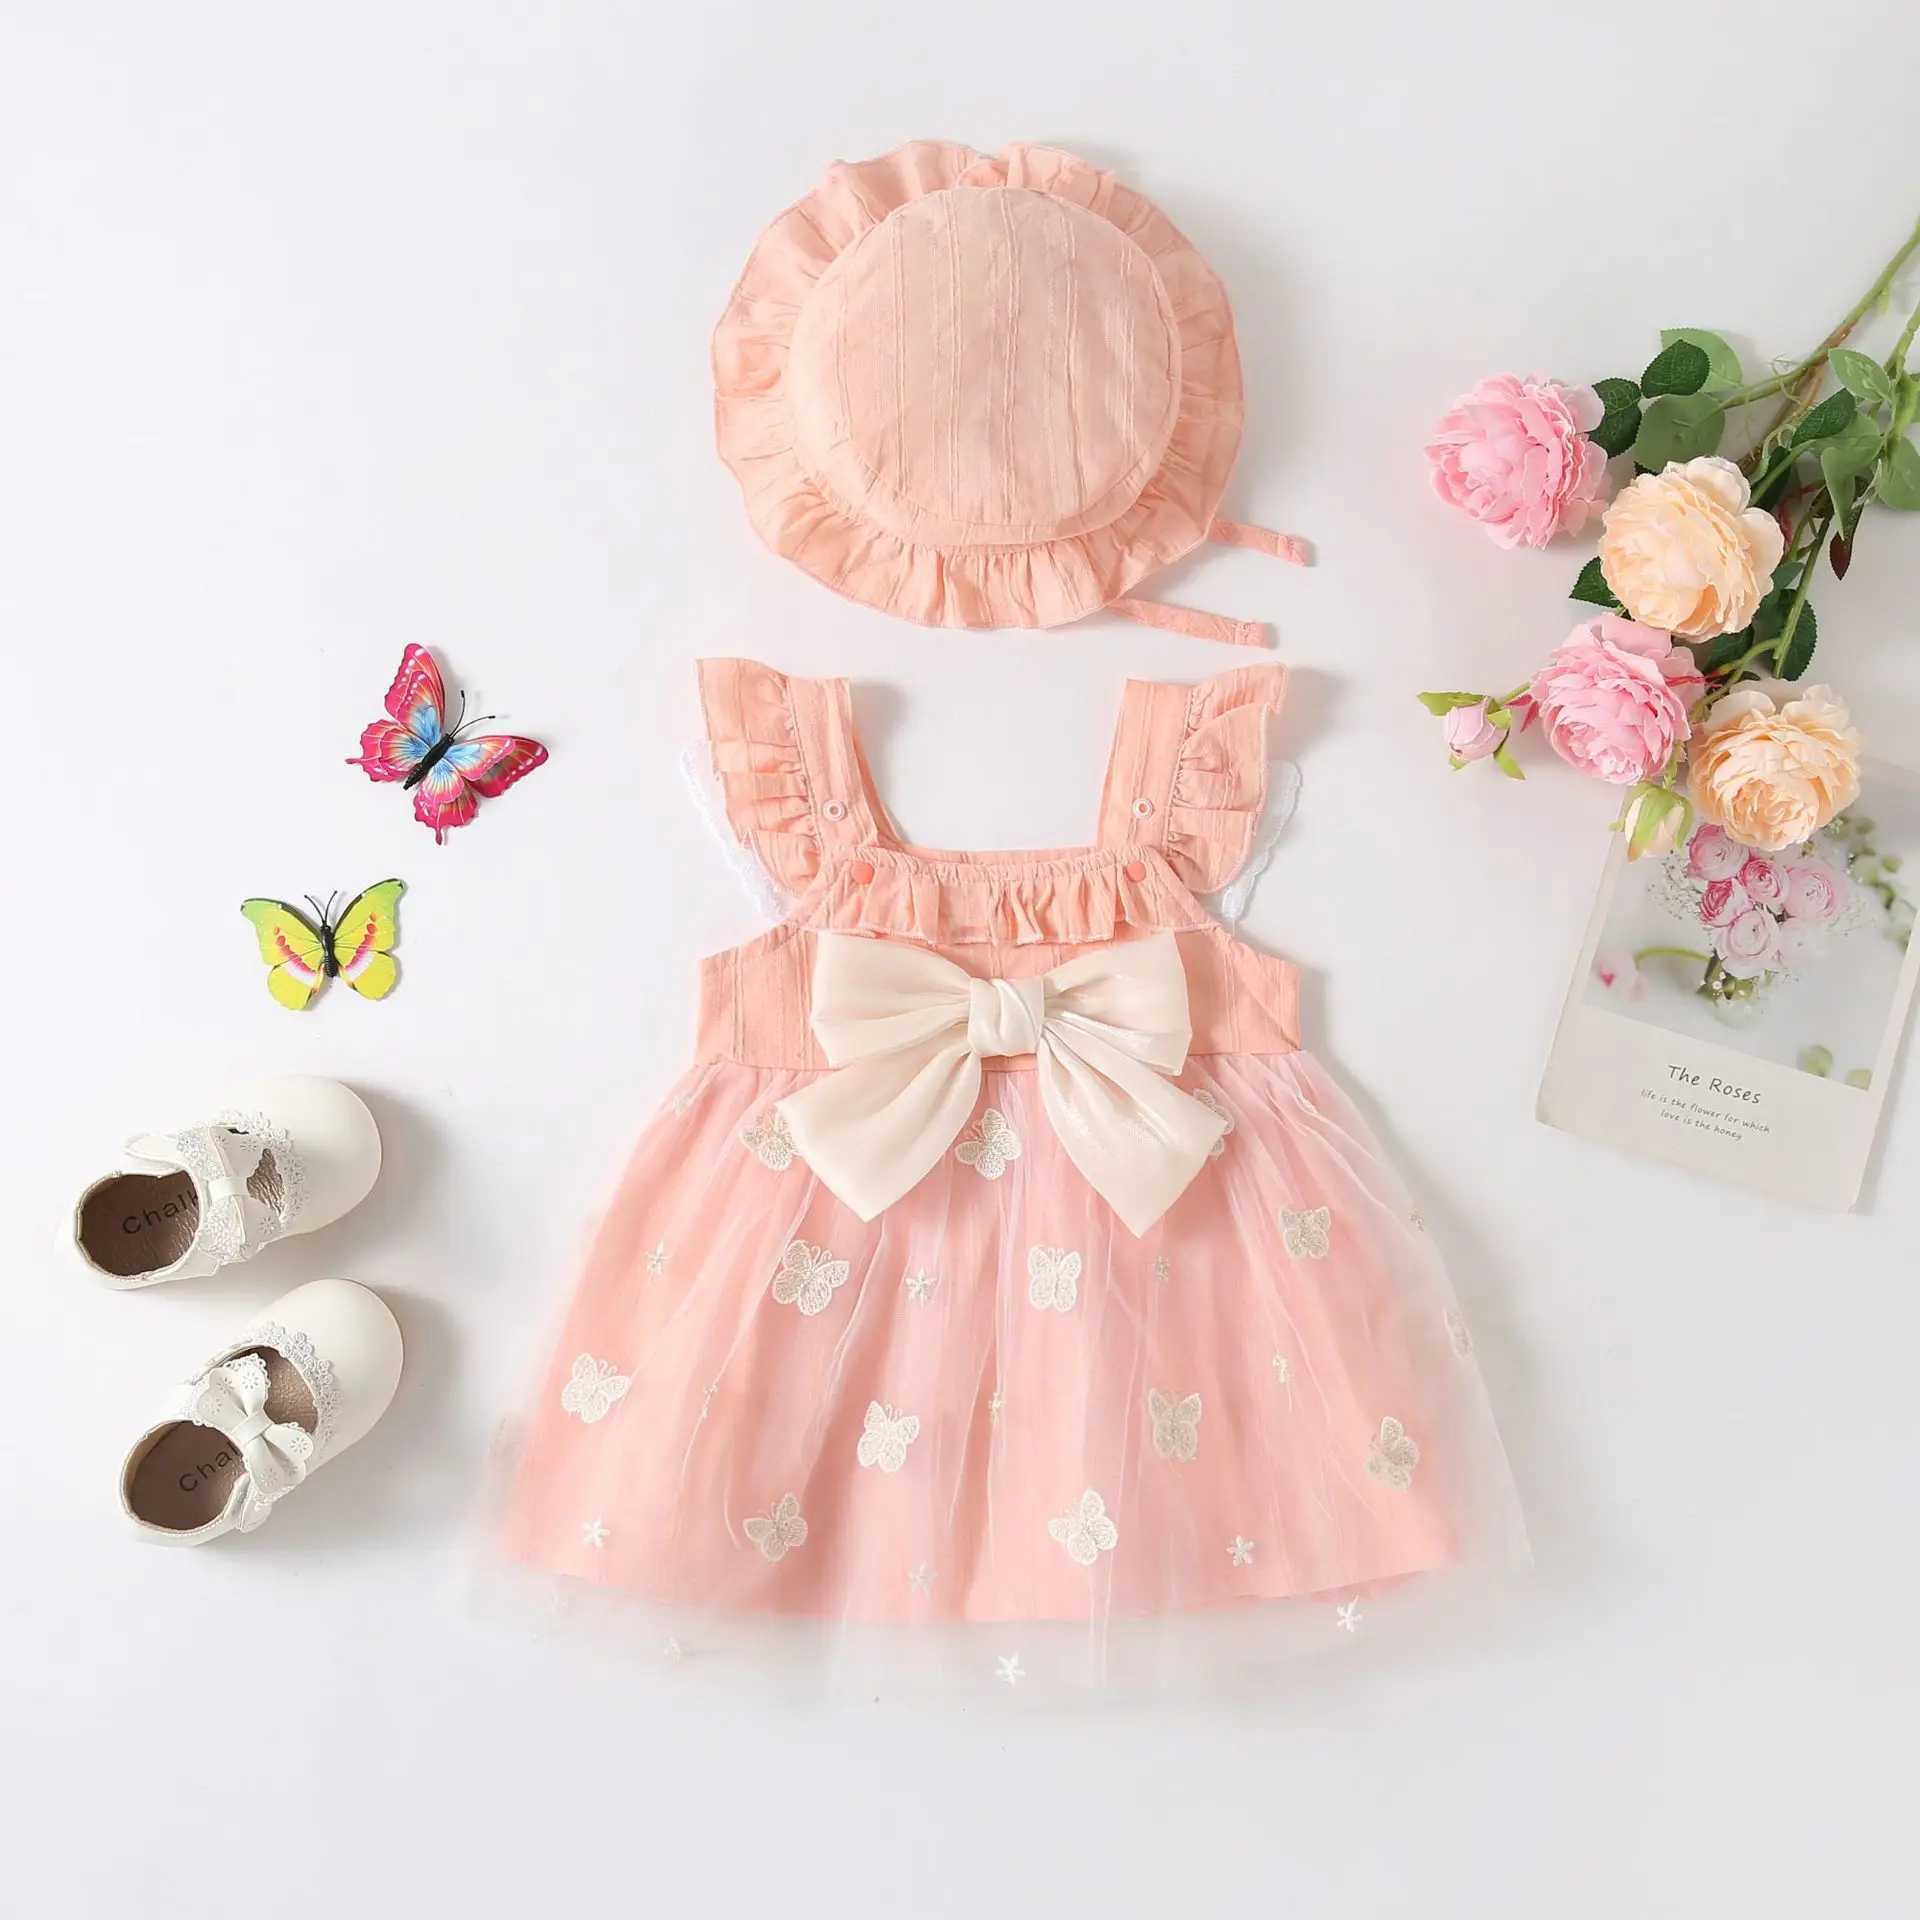 Girl's Dresses Summer Newborn Infant Toddler Girls Lace Dress Sun Hat Outfits Baby Girls Clothes Butterfly